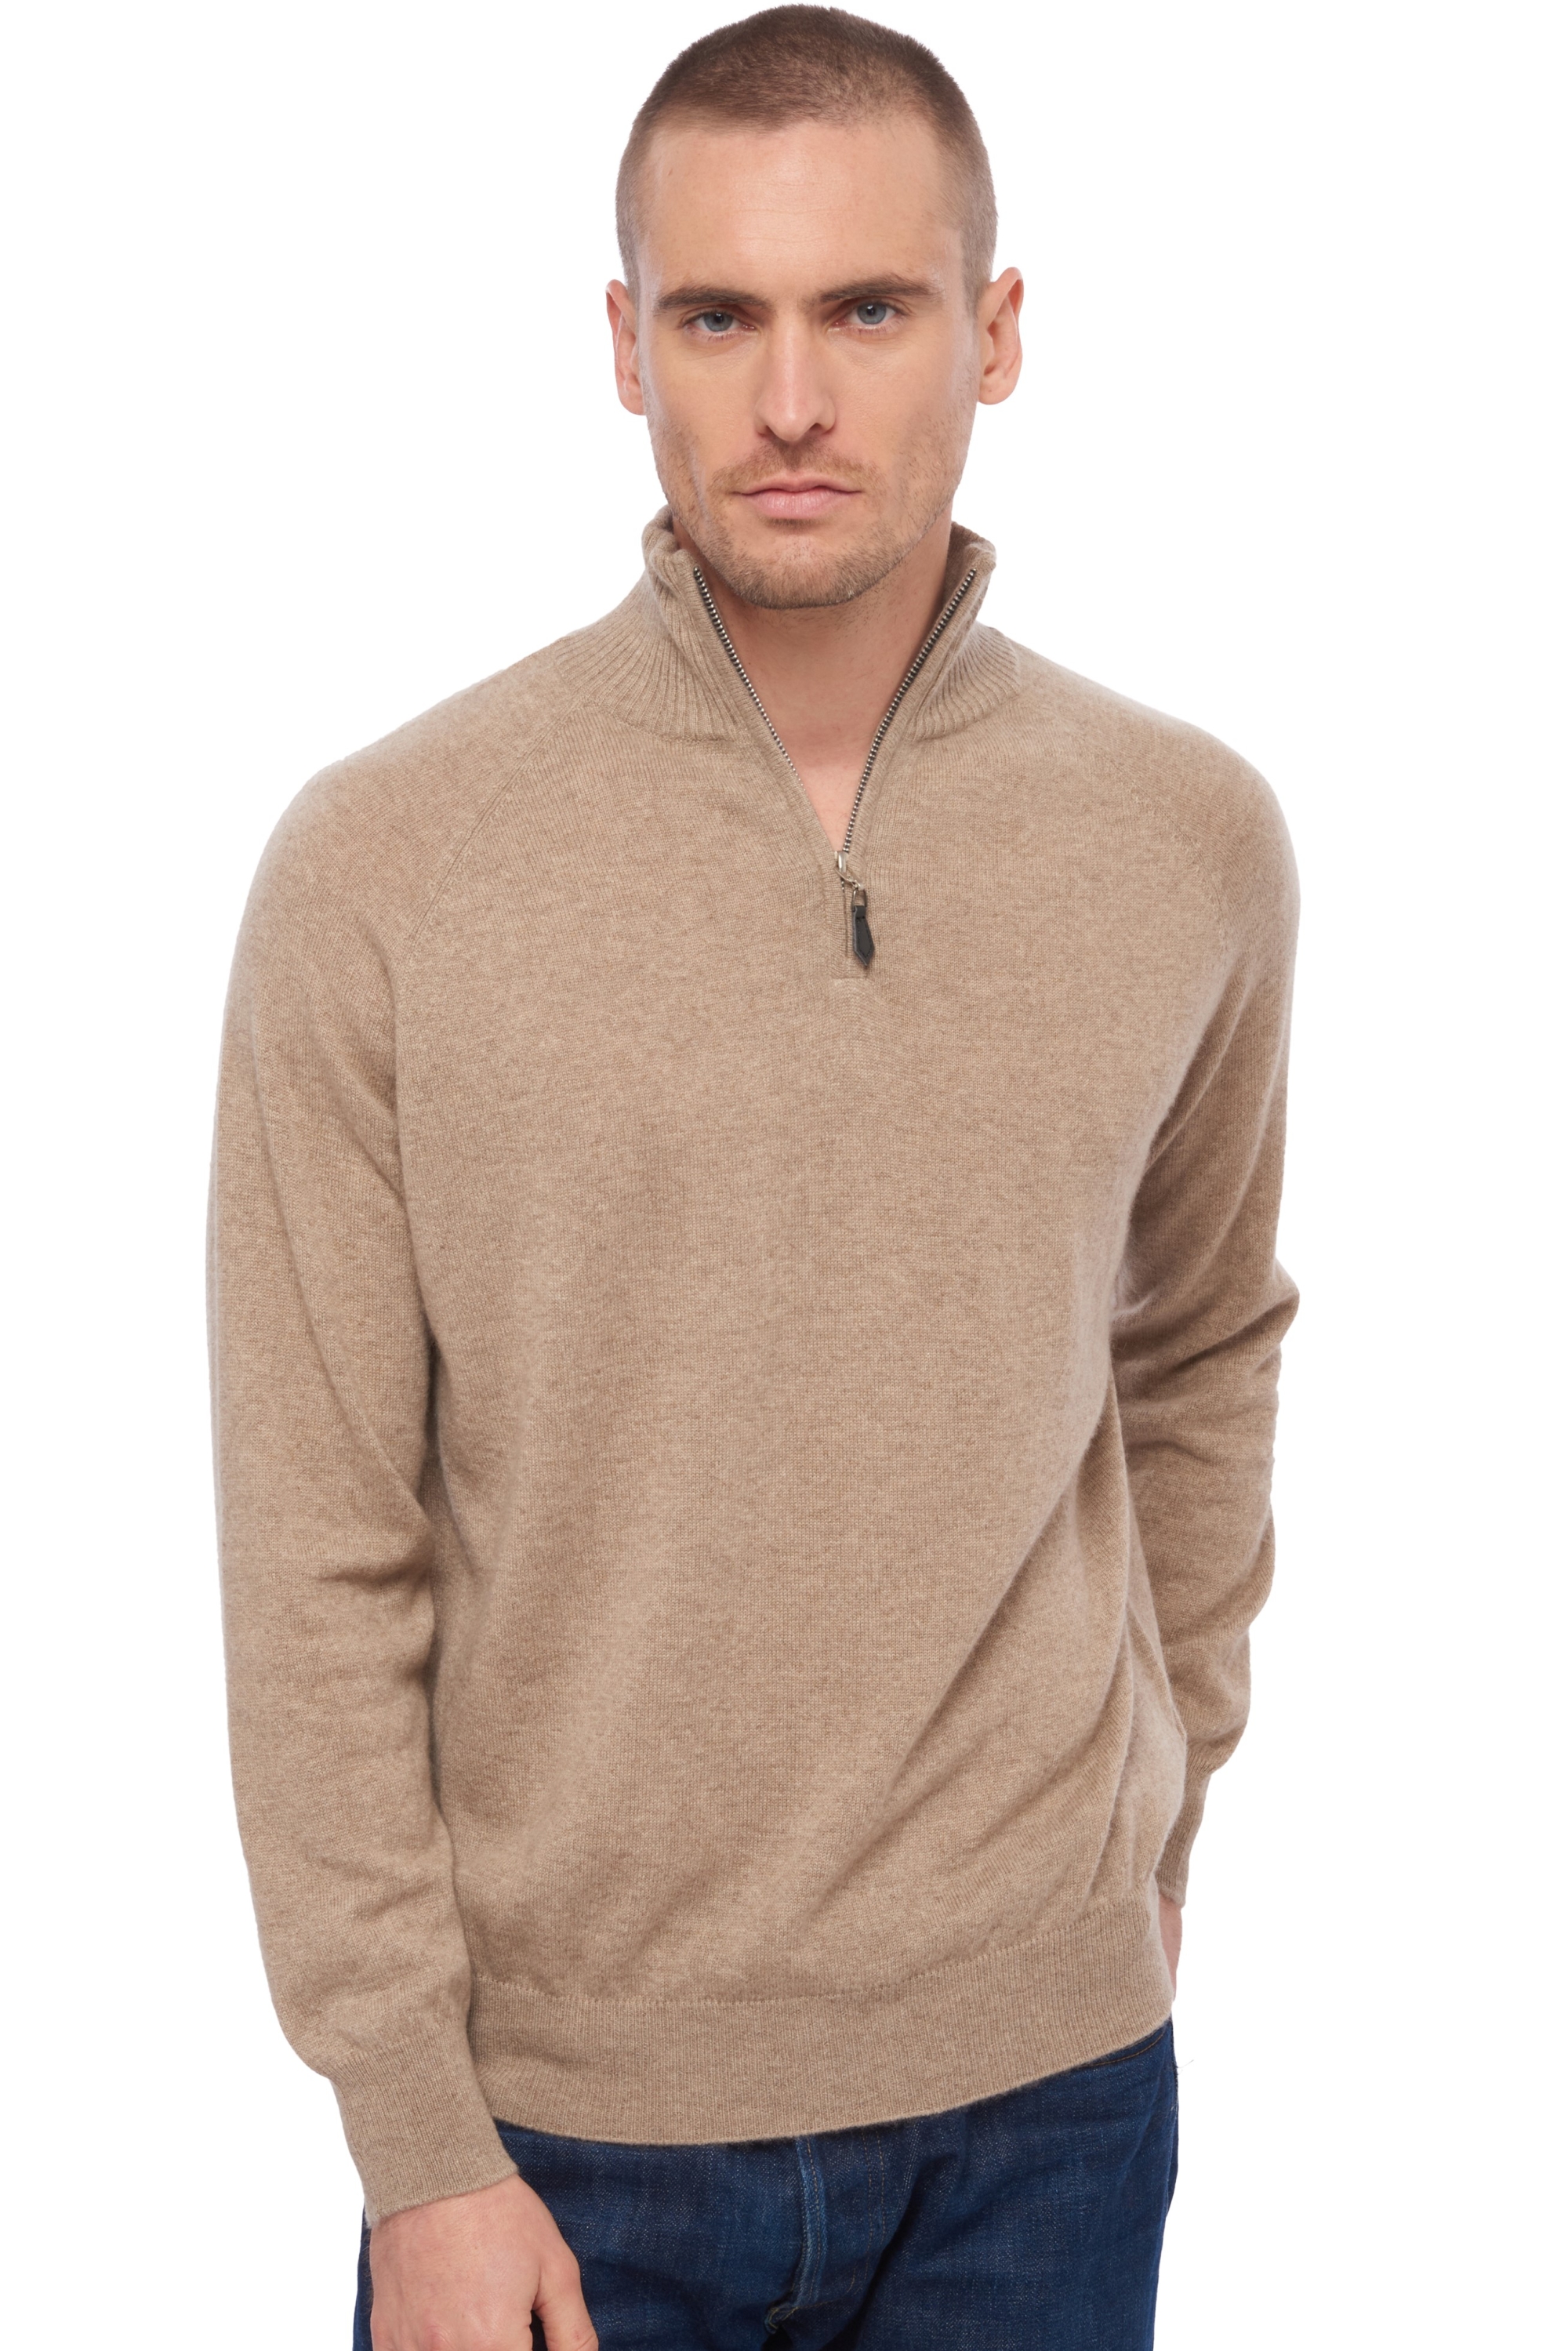 Cachemire pull homme natural vez natural brown 3xl